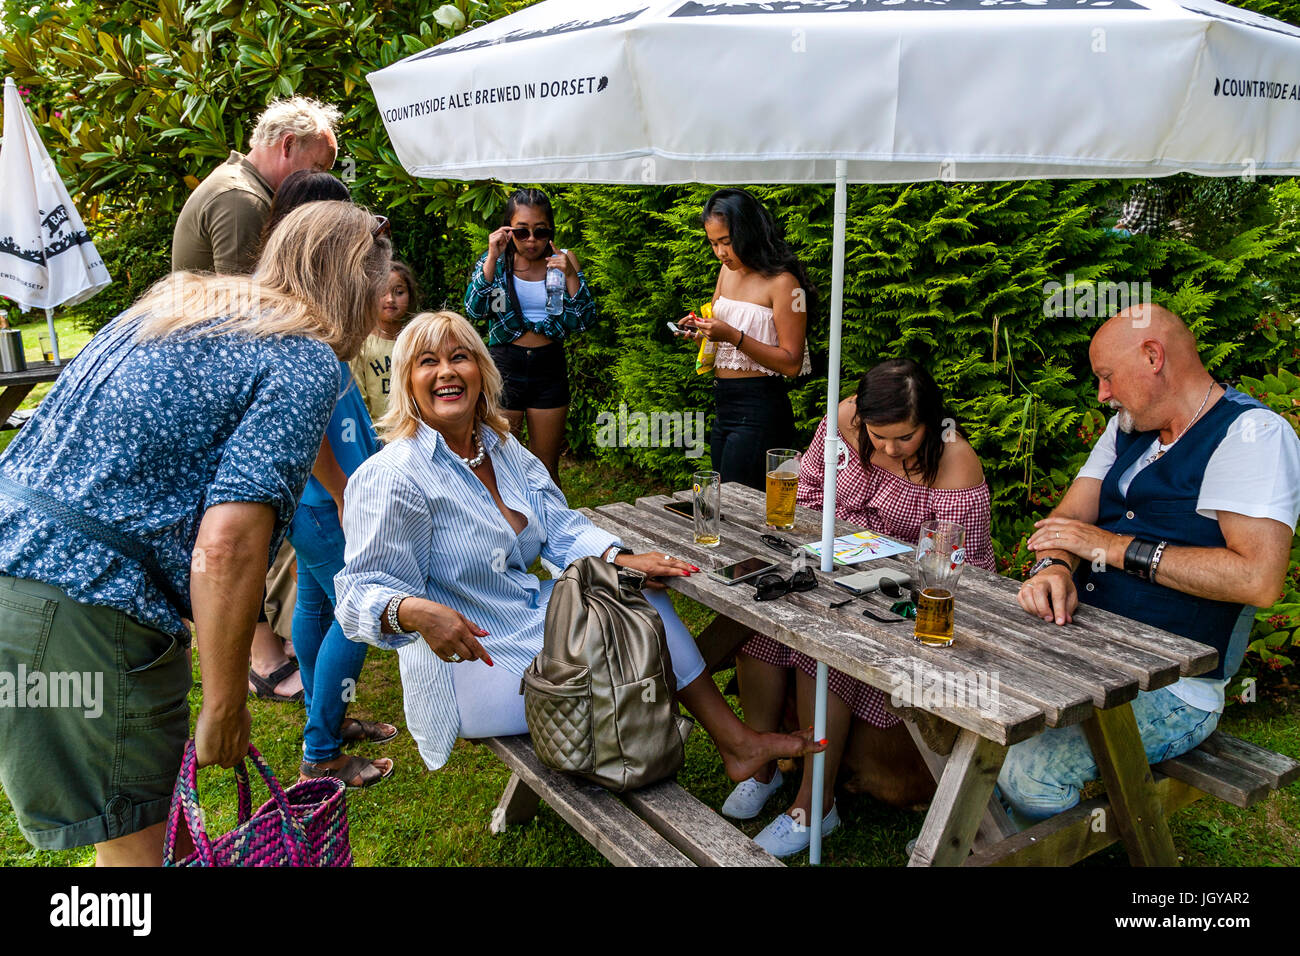 A Family Meet Up In The Garden Of A Country Pub, Fairwarp, East Sussex, UK Stock Photo